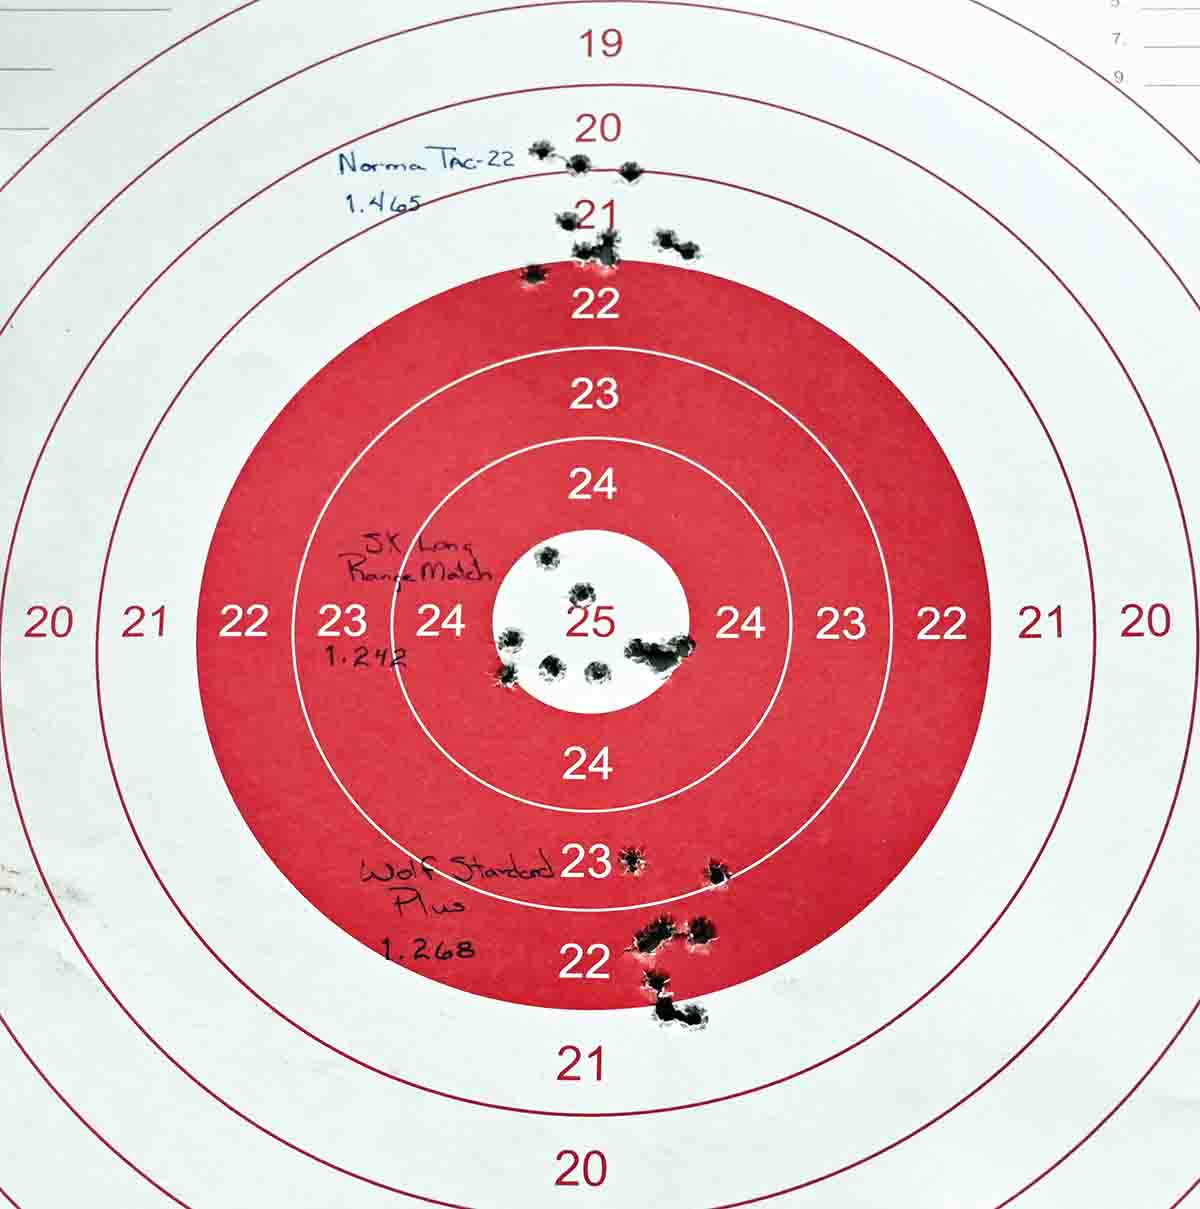 The 100-yard target with the three ammunition brands.